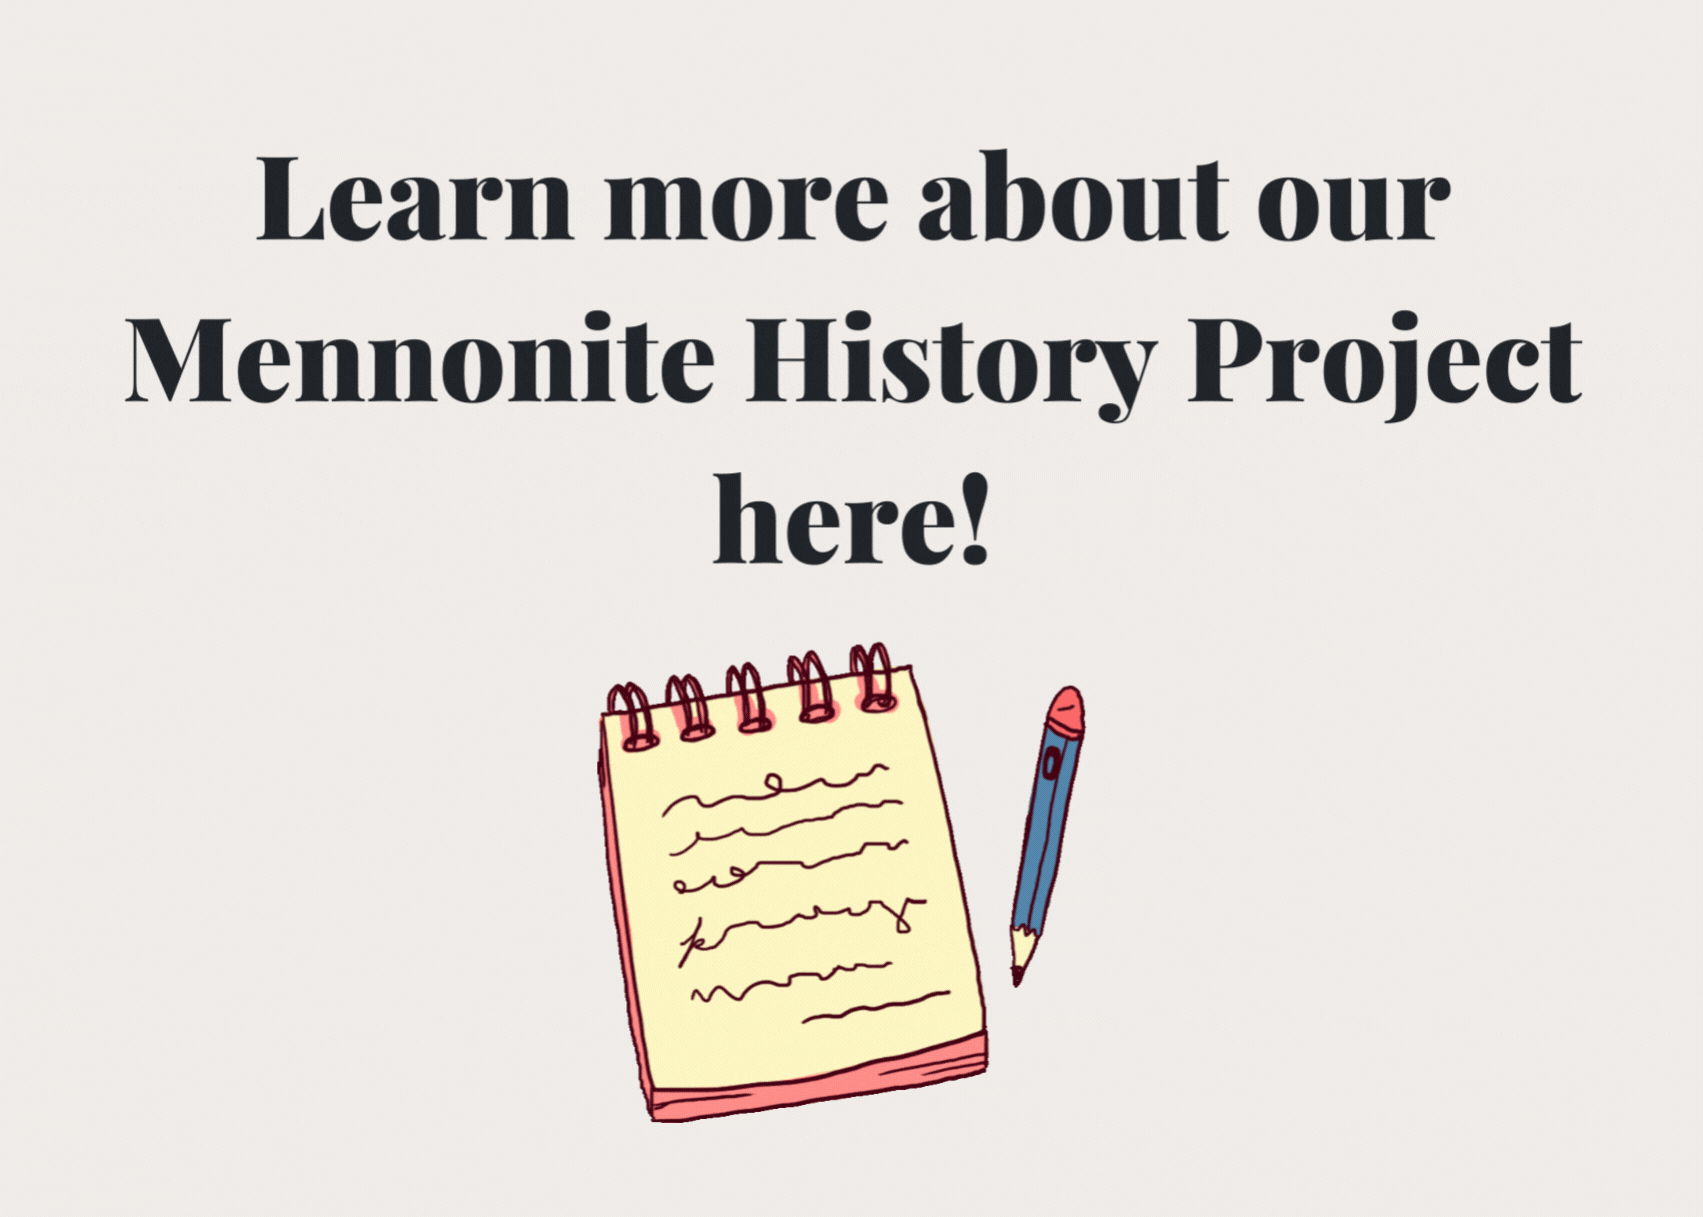 Reads "Learn more about our Mennonite History Project here!"